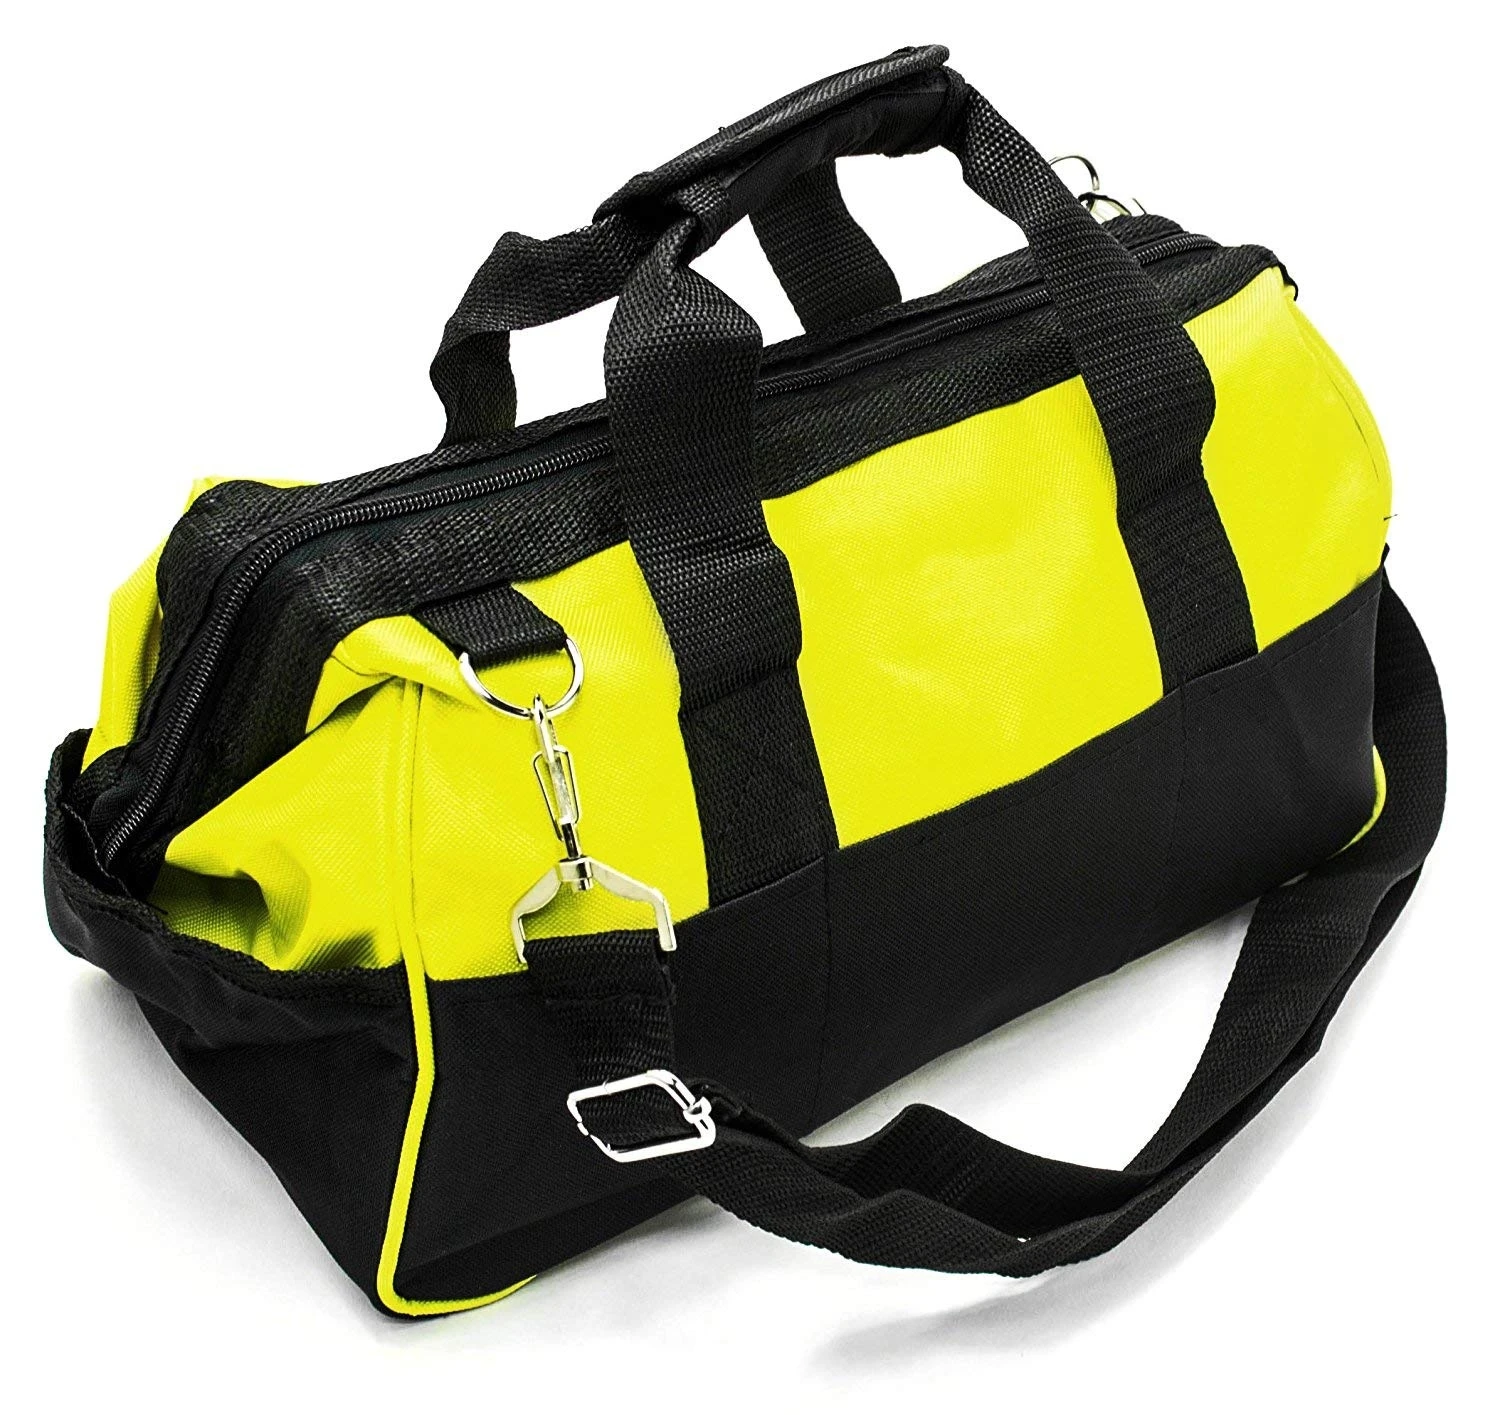 Water Resistant Carrying Tool Bag Bag For Tool - Buy Hand Carry Water ...